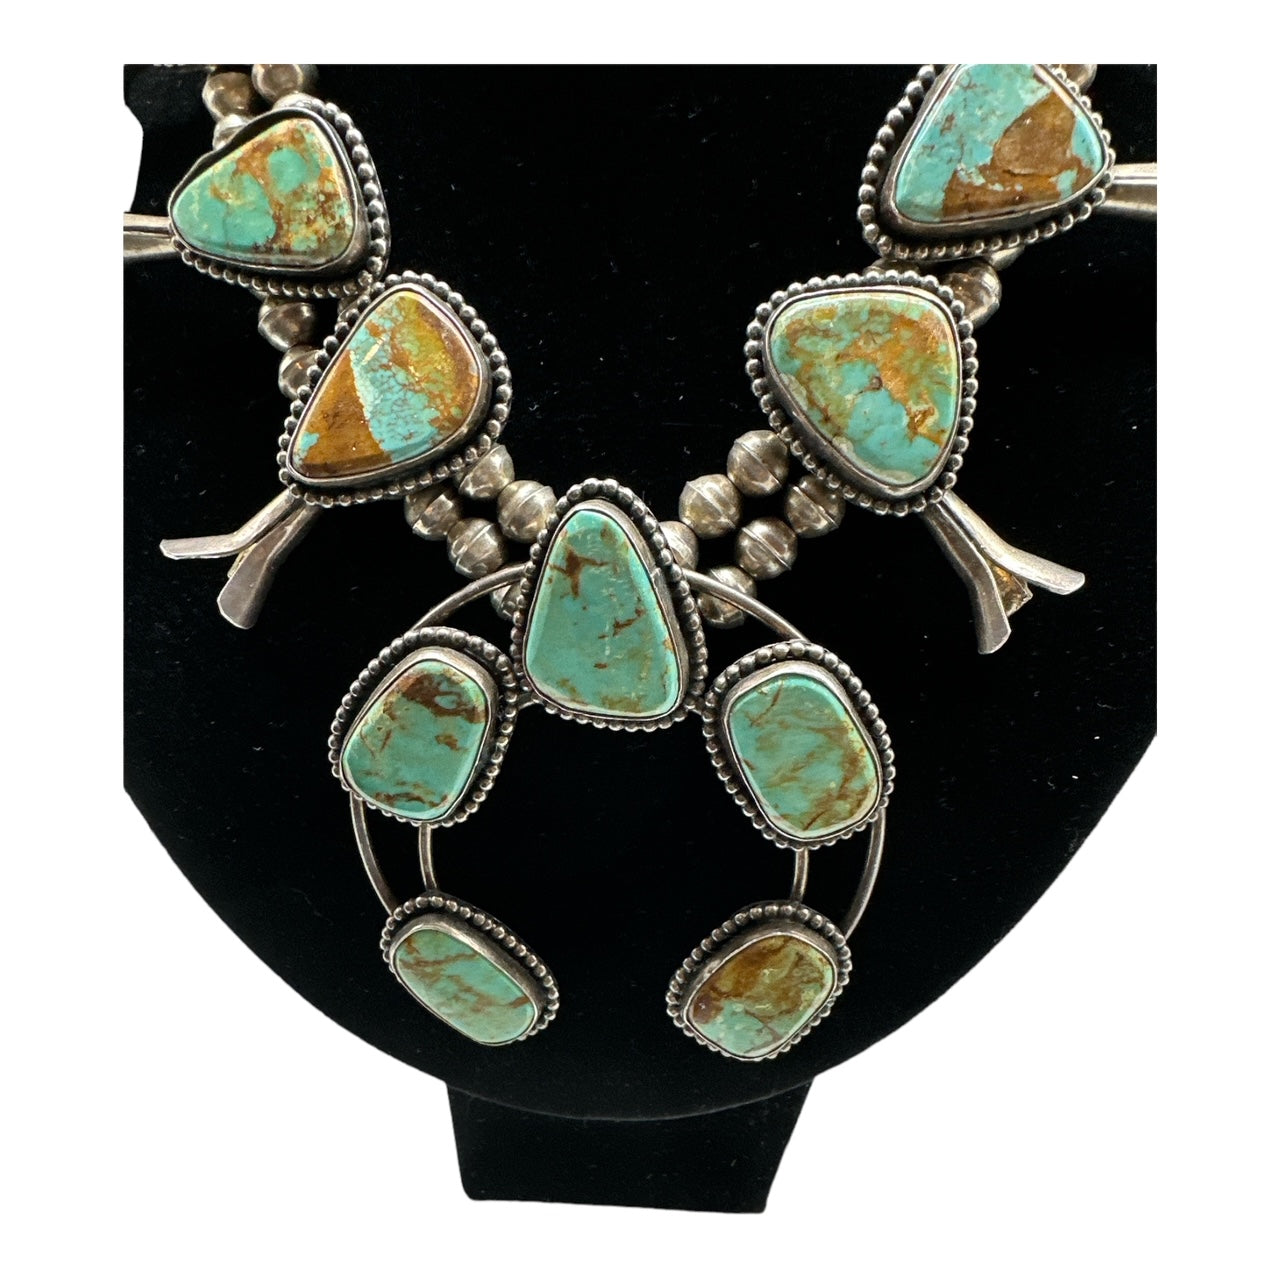 Native american jewelry for sale, Vintage Navajo Squash Blossom for sale, Royston turquoise jewelry, telluride jewelry 